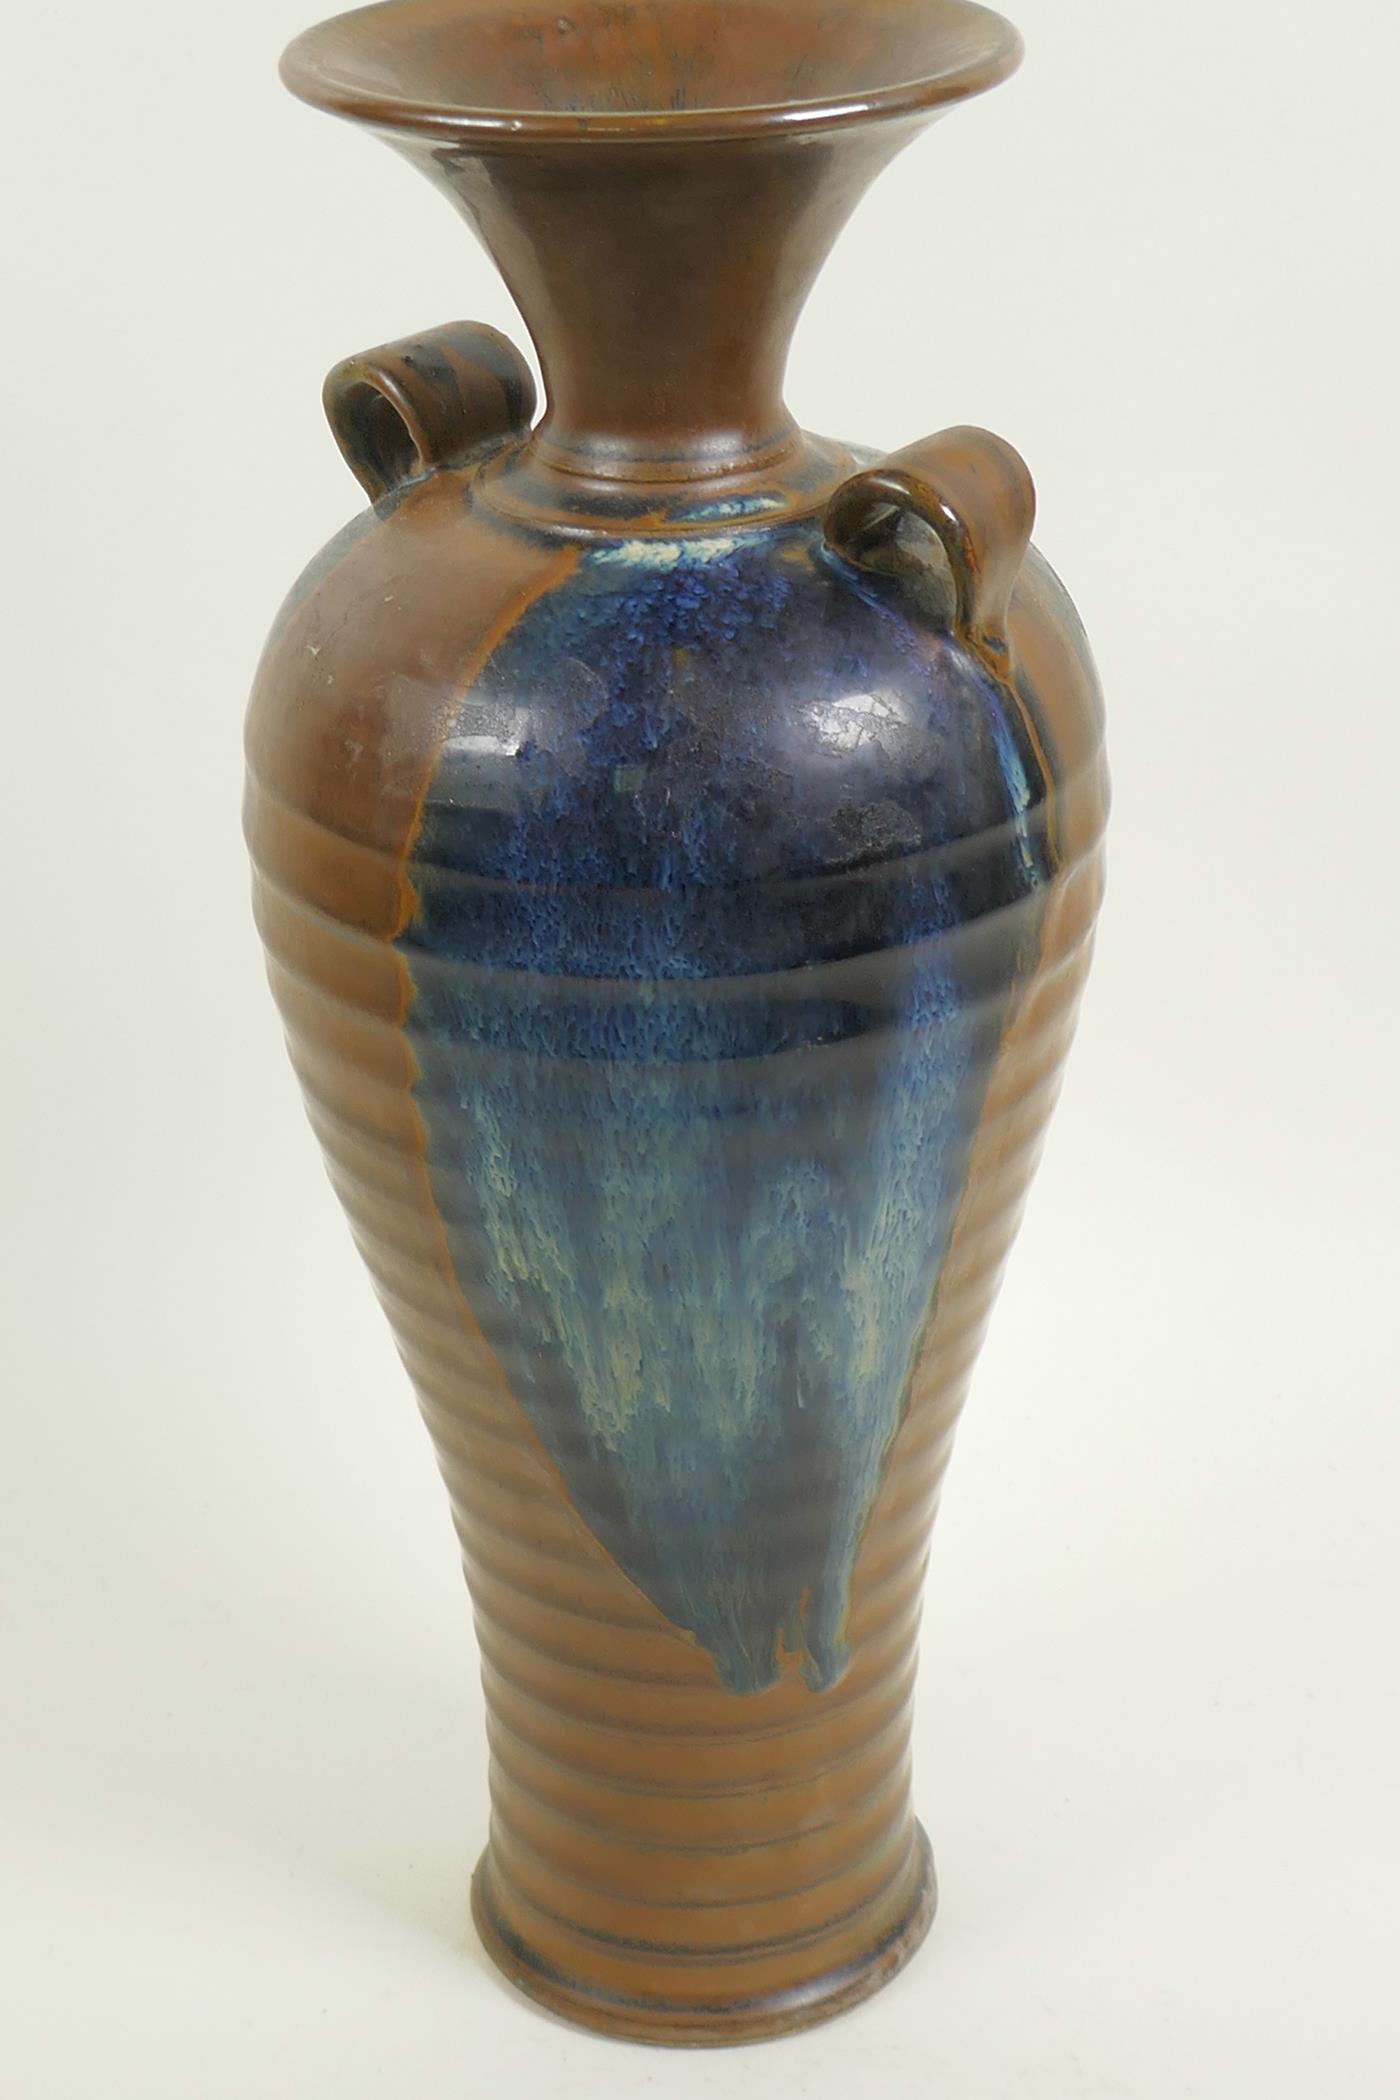 A Chinese stoneware baluster vase with rib formed body and two loop handles, drip glazed in brown - Image 4 of 4